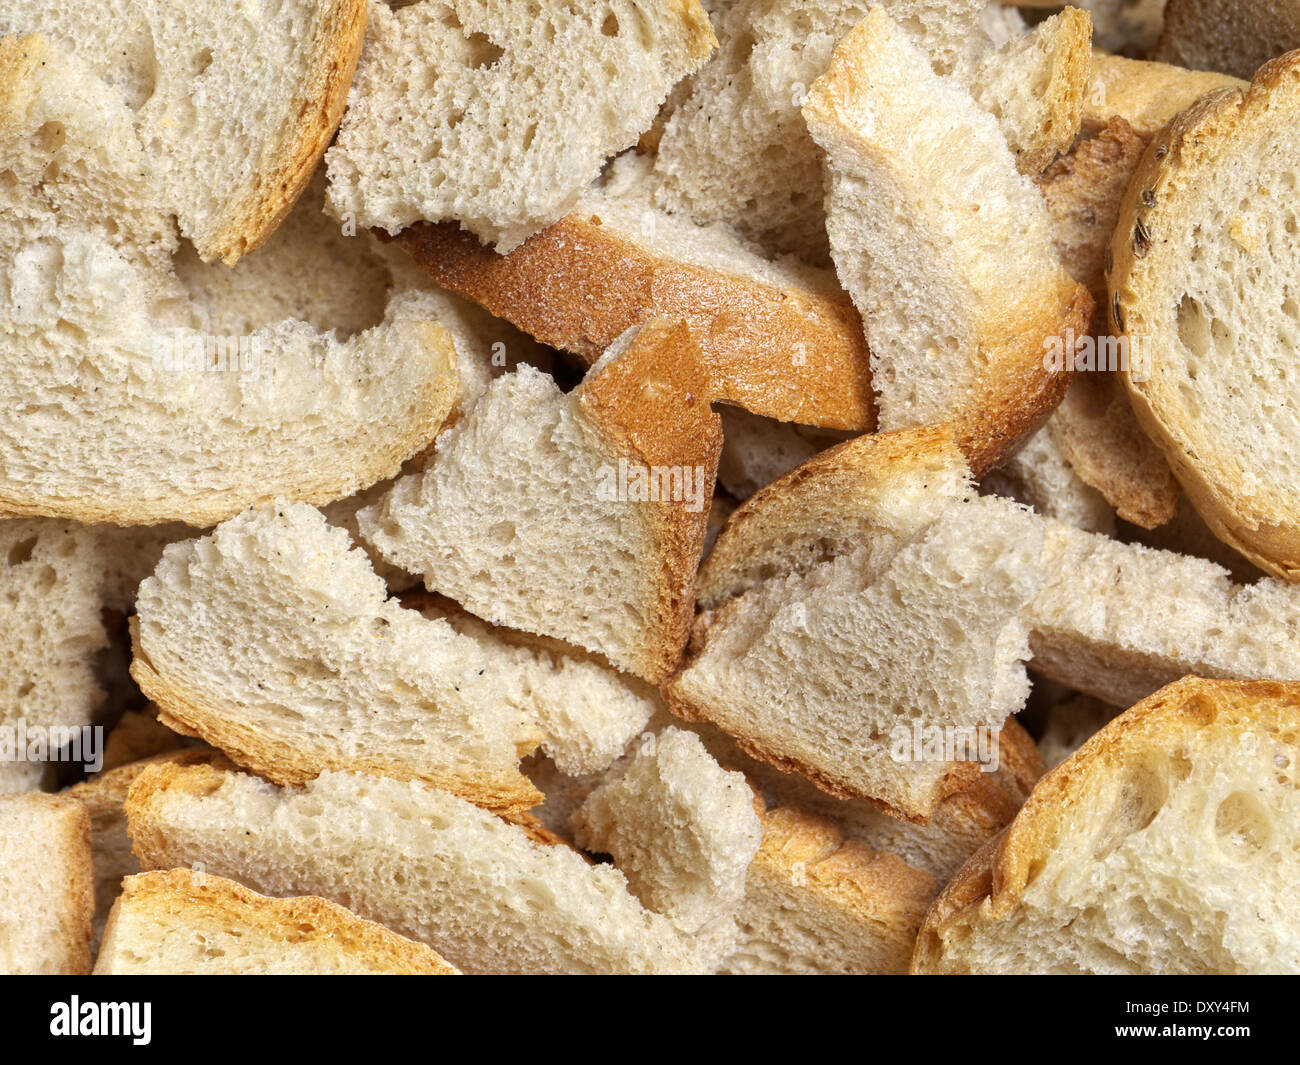 Chunks of died bread shot from above Stock Photo